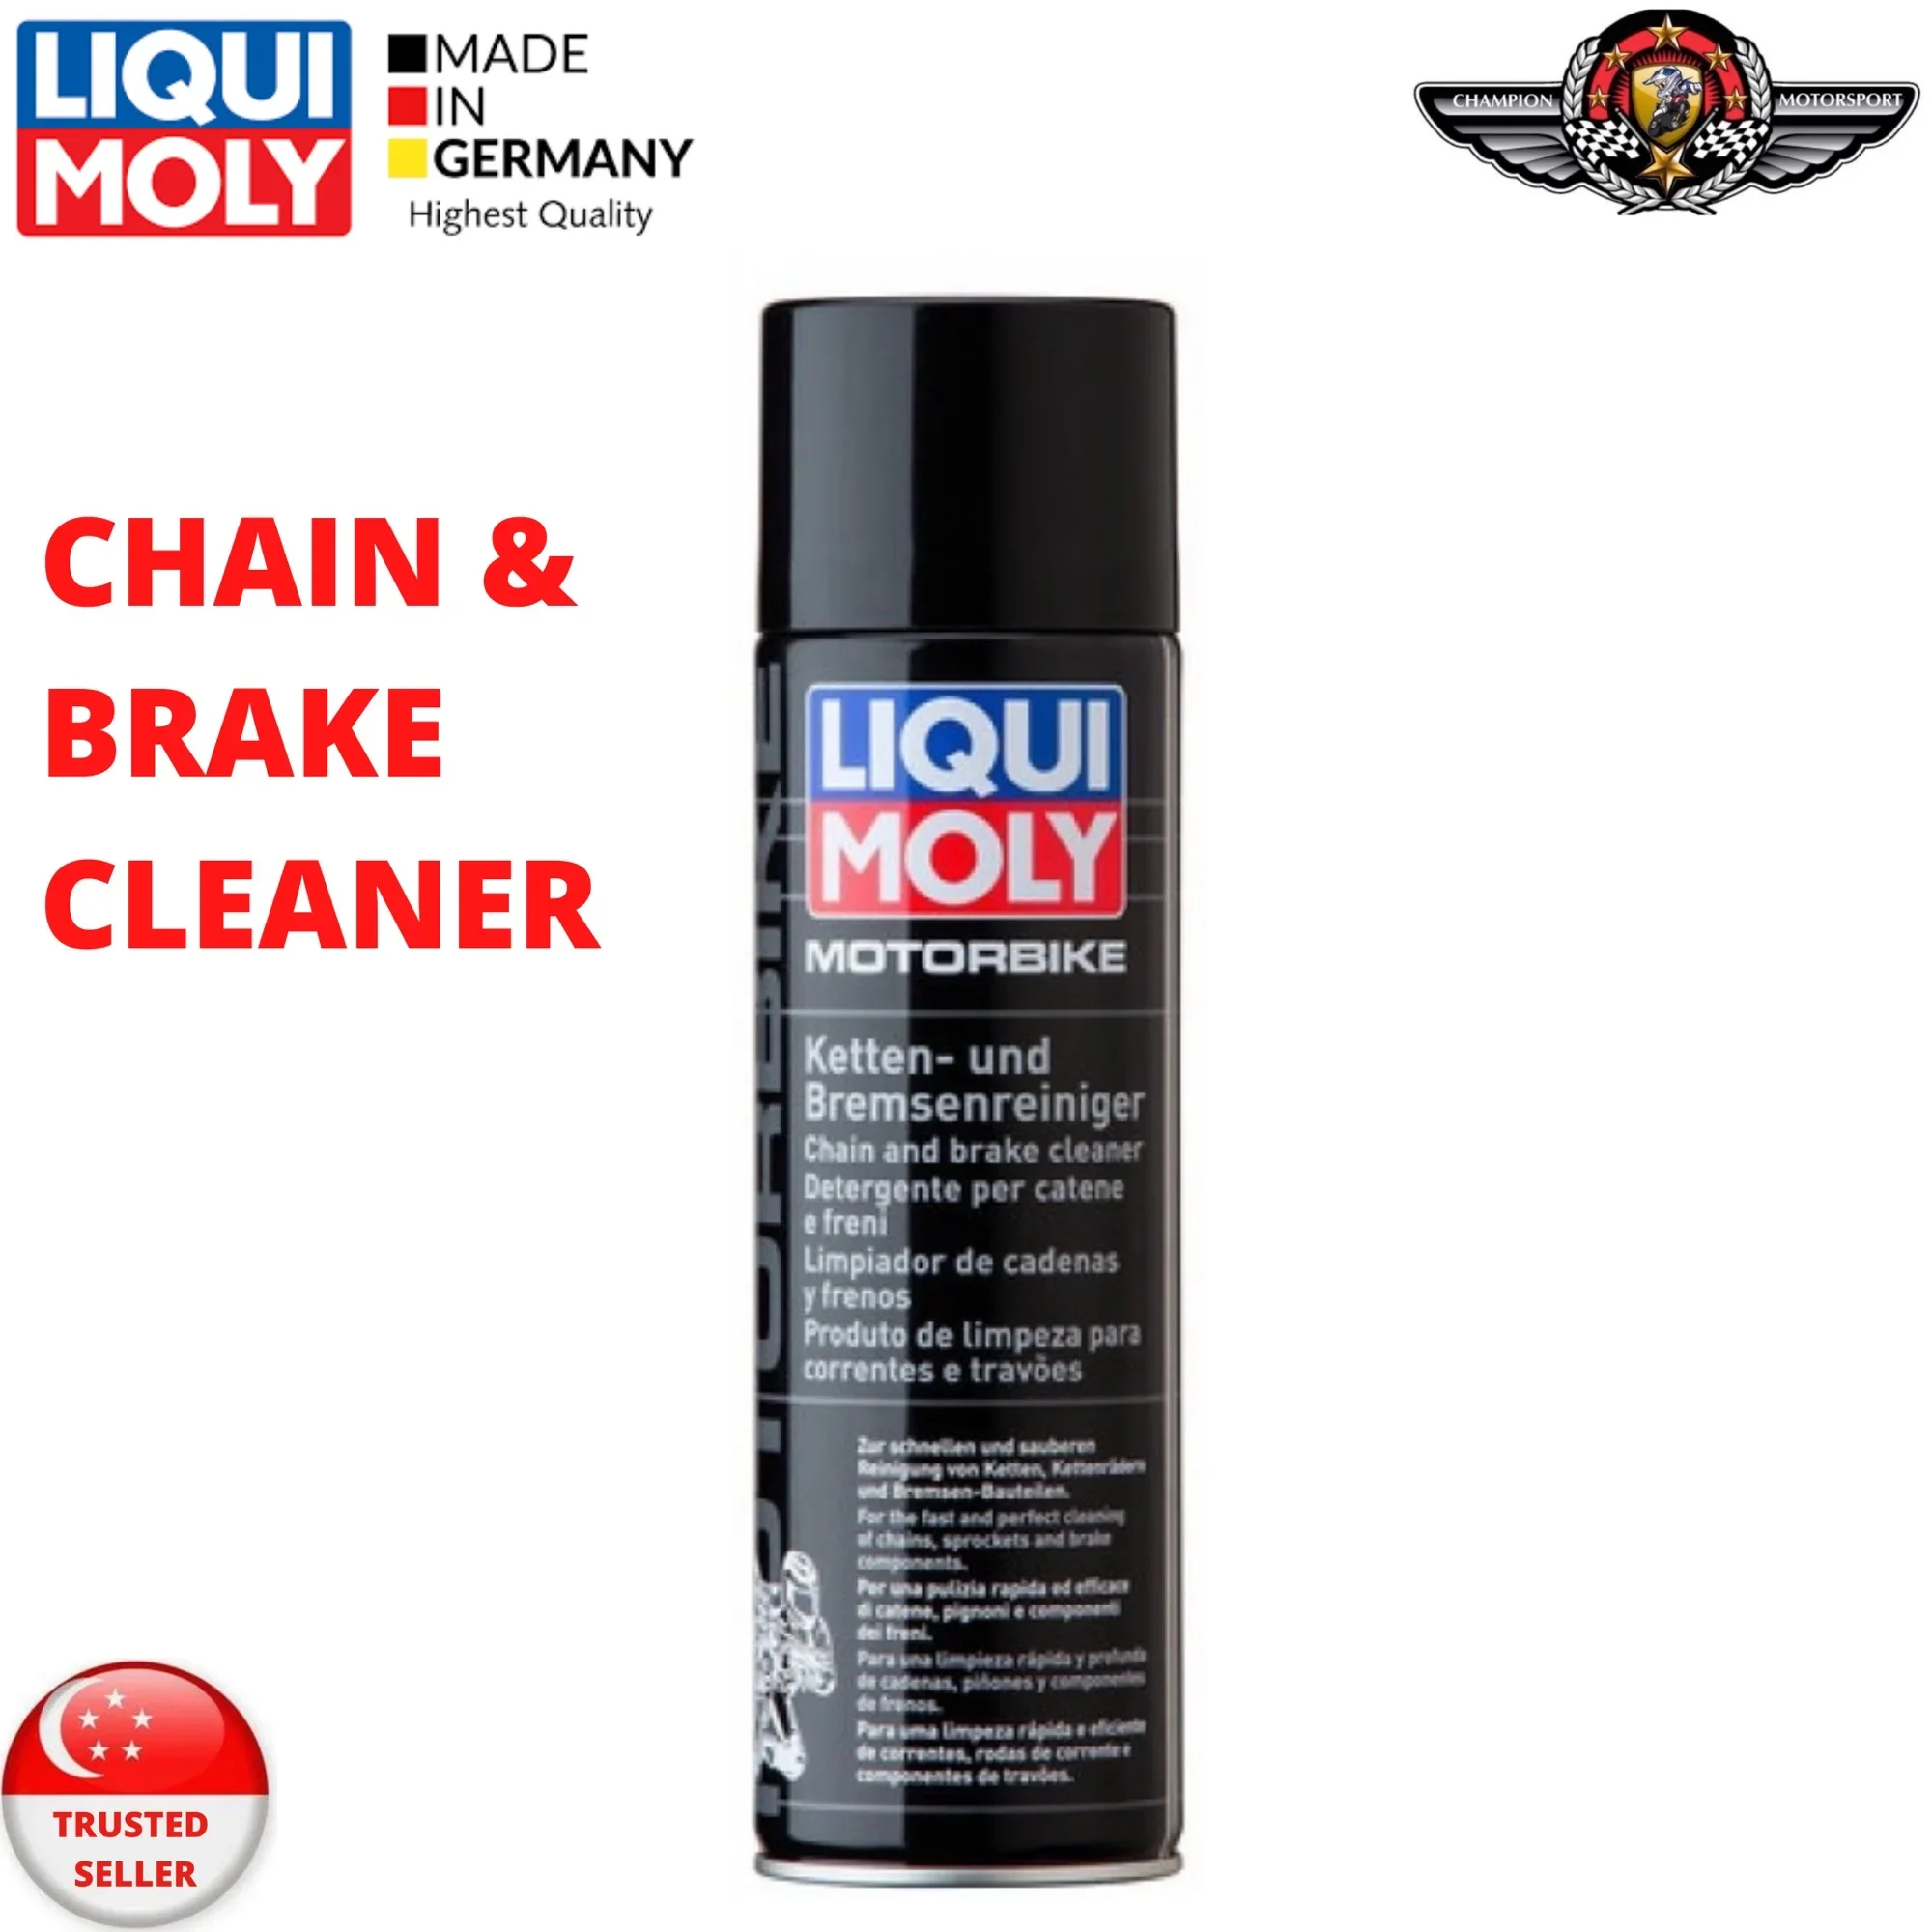 LIQUI MOLY CHAIN & BRAKE CLEANER 500ML (1602)(Made in Germany 🇩🇪)